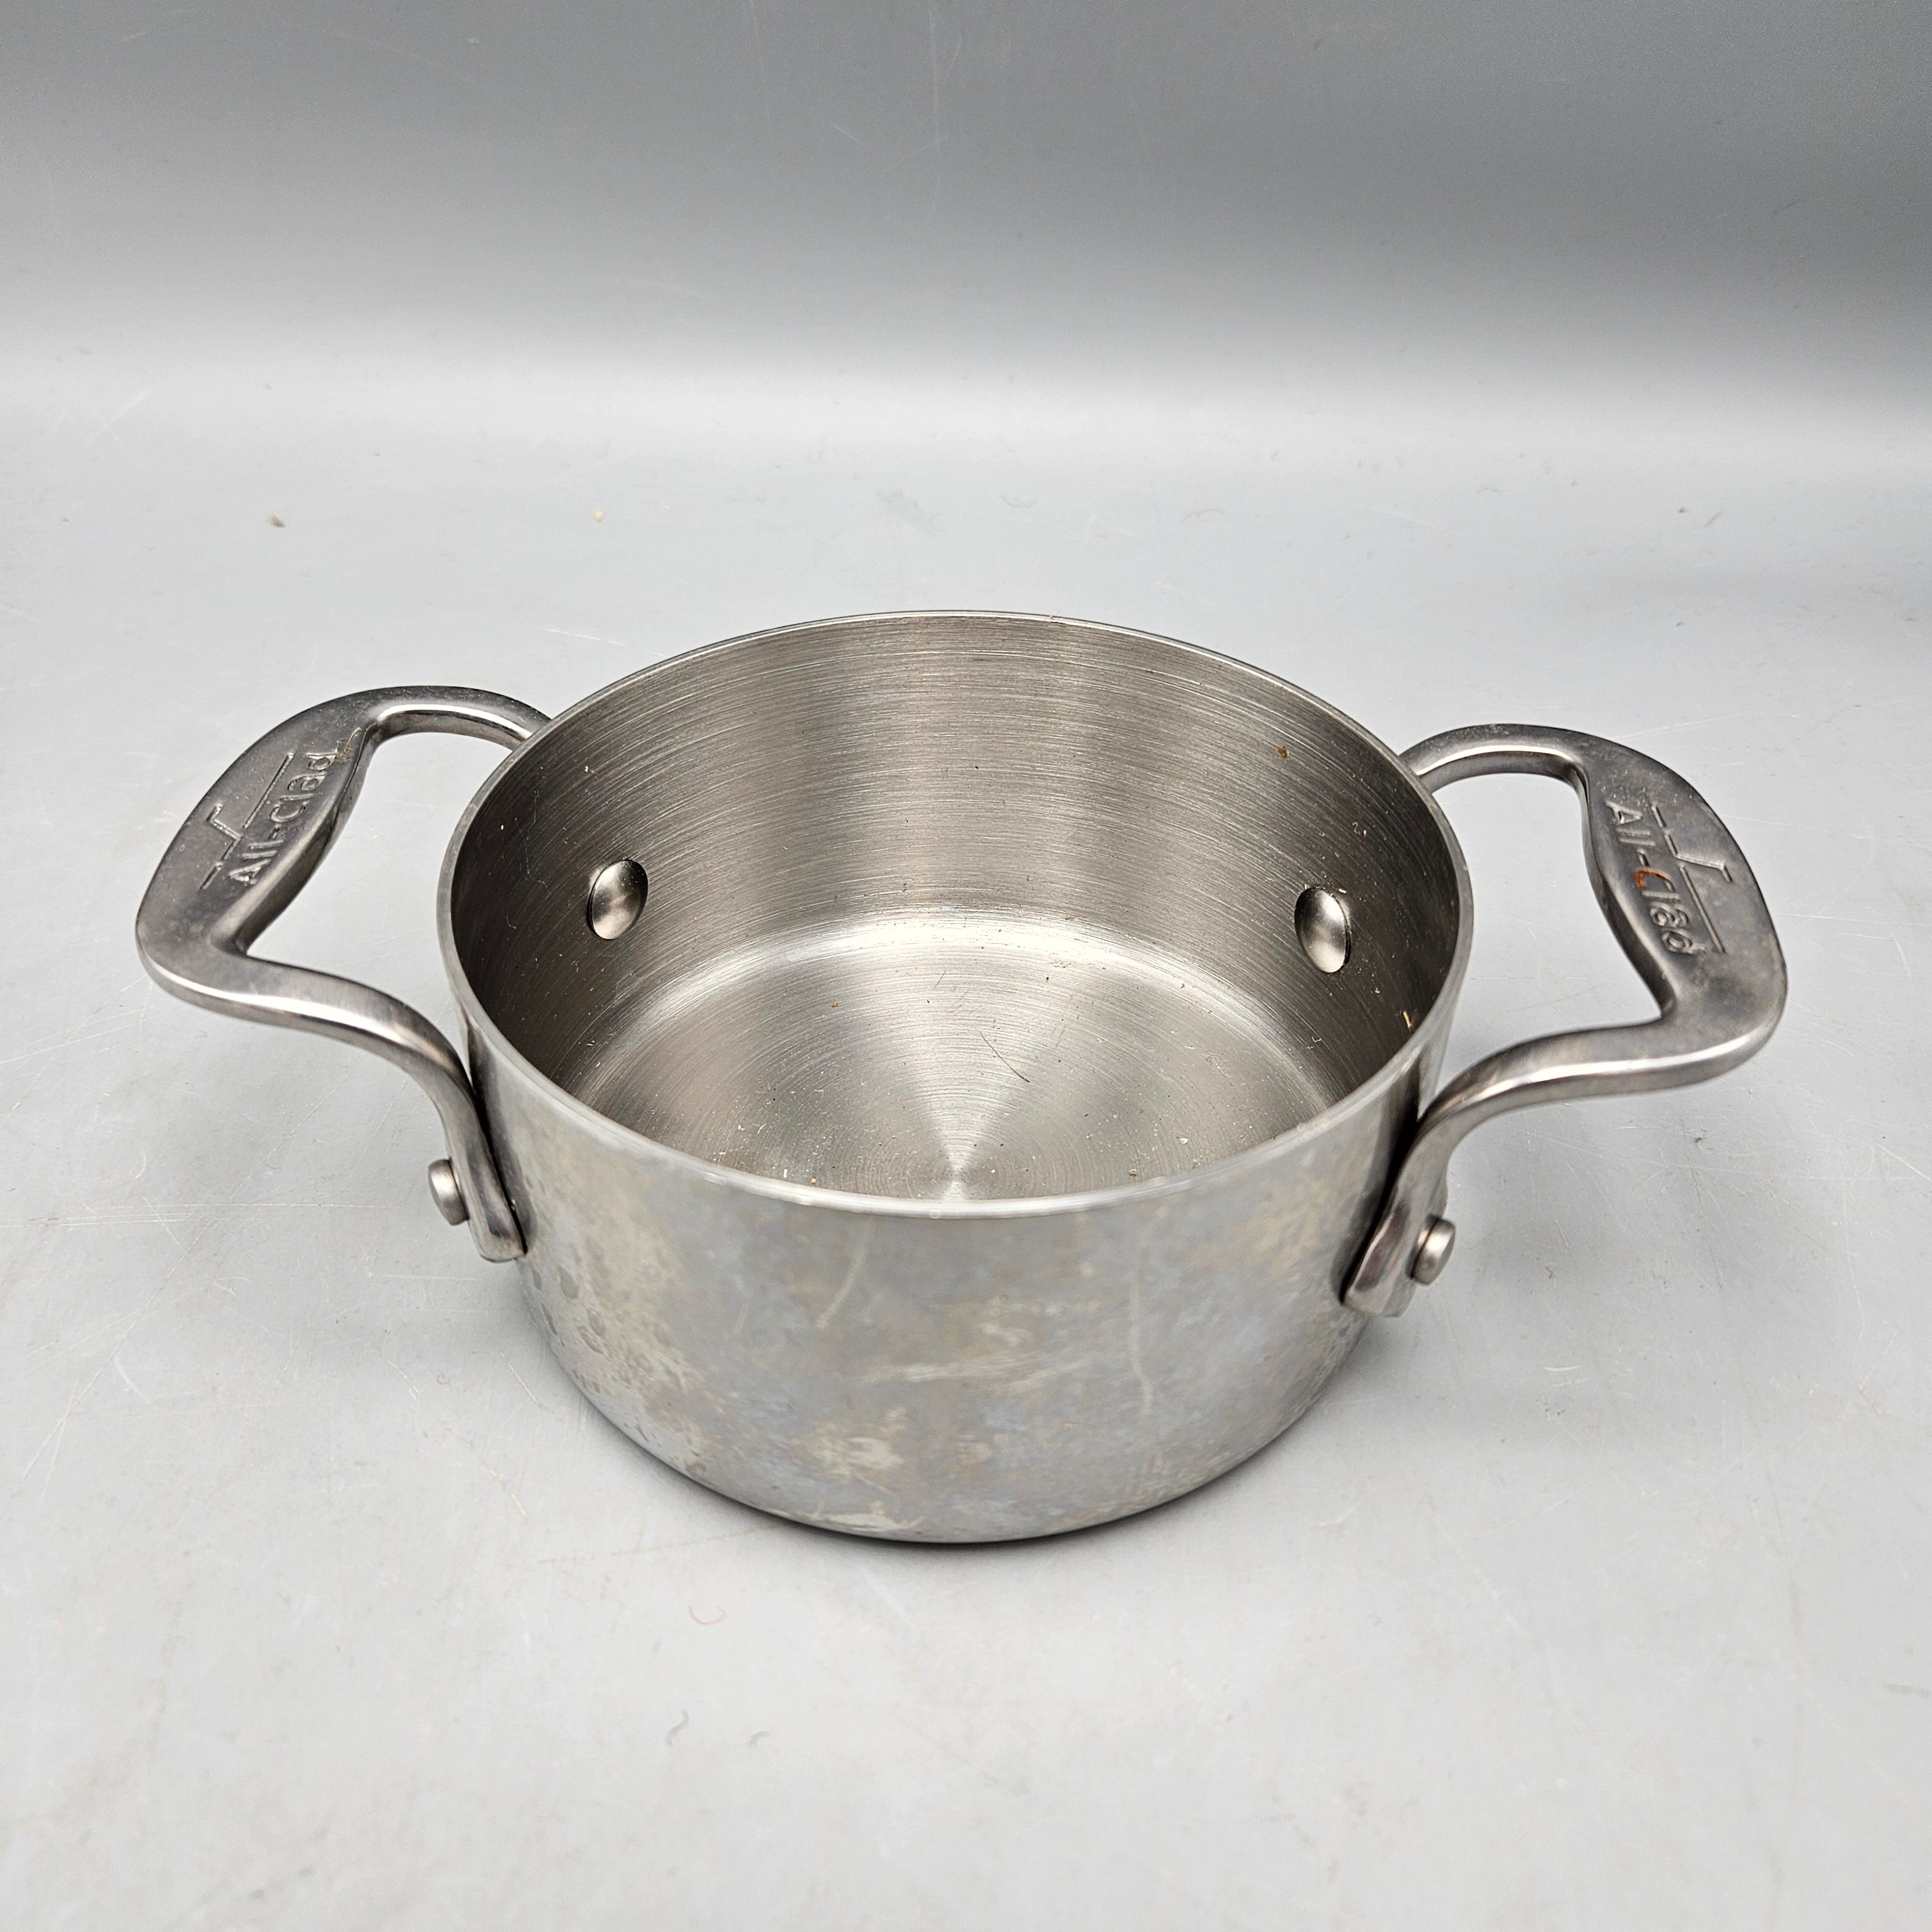 All-Clad Stainless Steel 0.5 Quart Mini Cocotte 1/2 qt Saucepan Pot with Lid  NEW